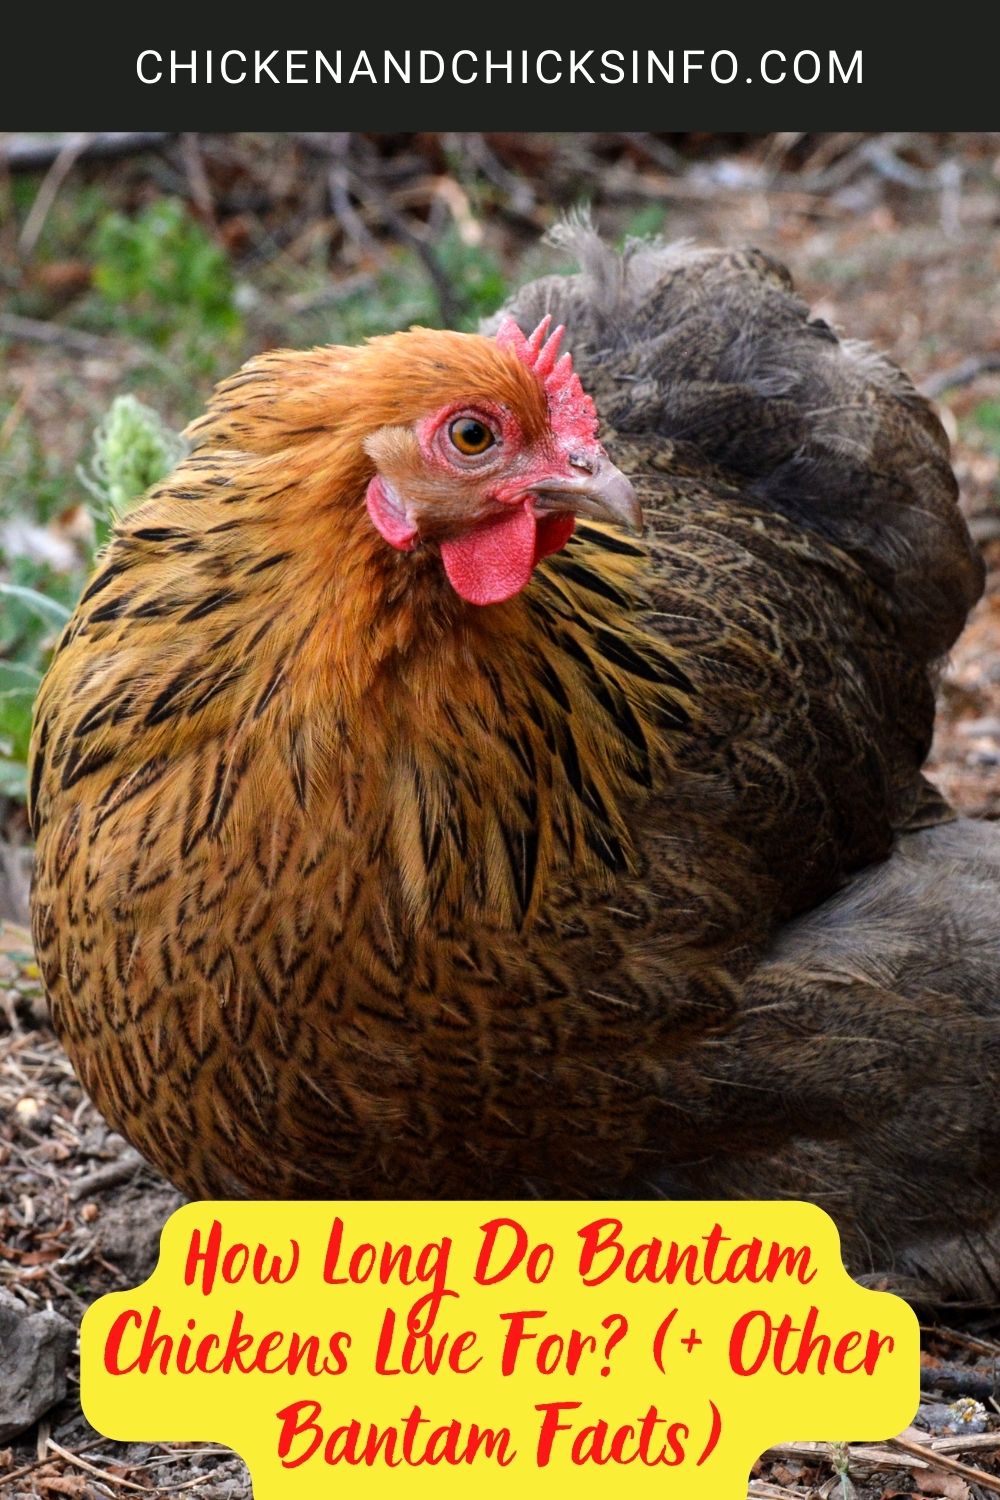 How Long Do Bantam Chickens Live For? (+ Other Bantam Facts) poster.
